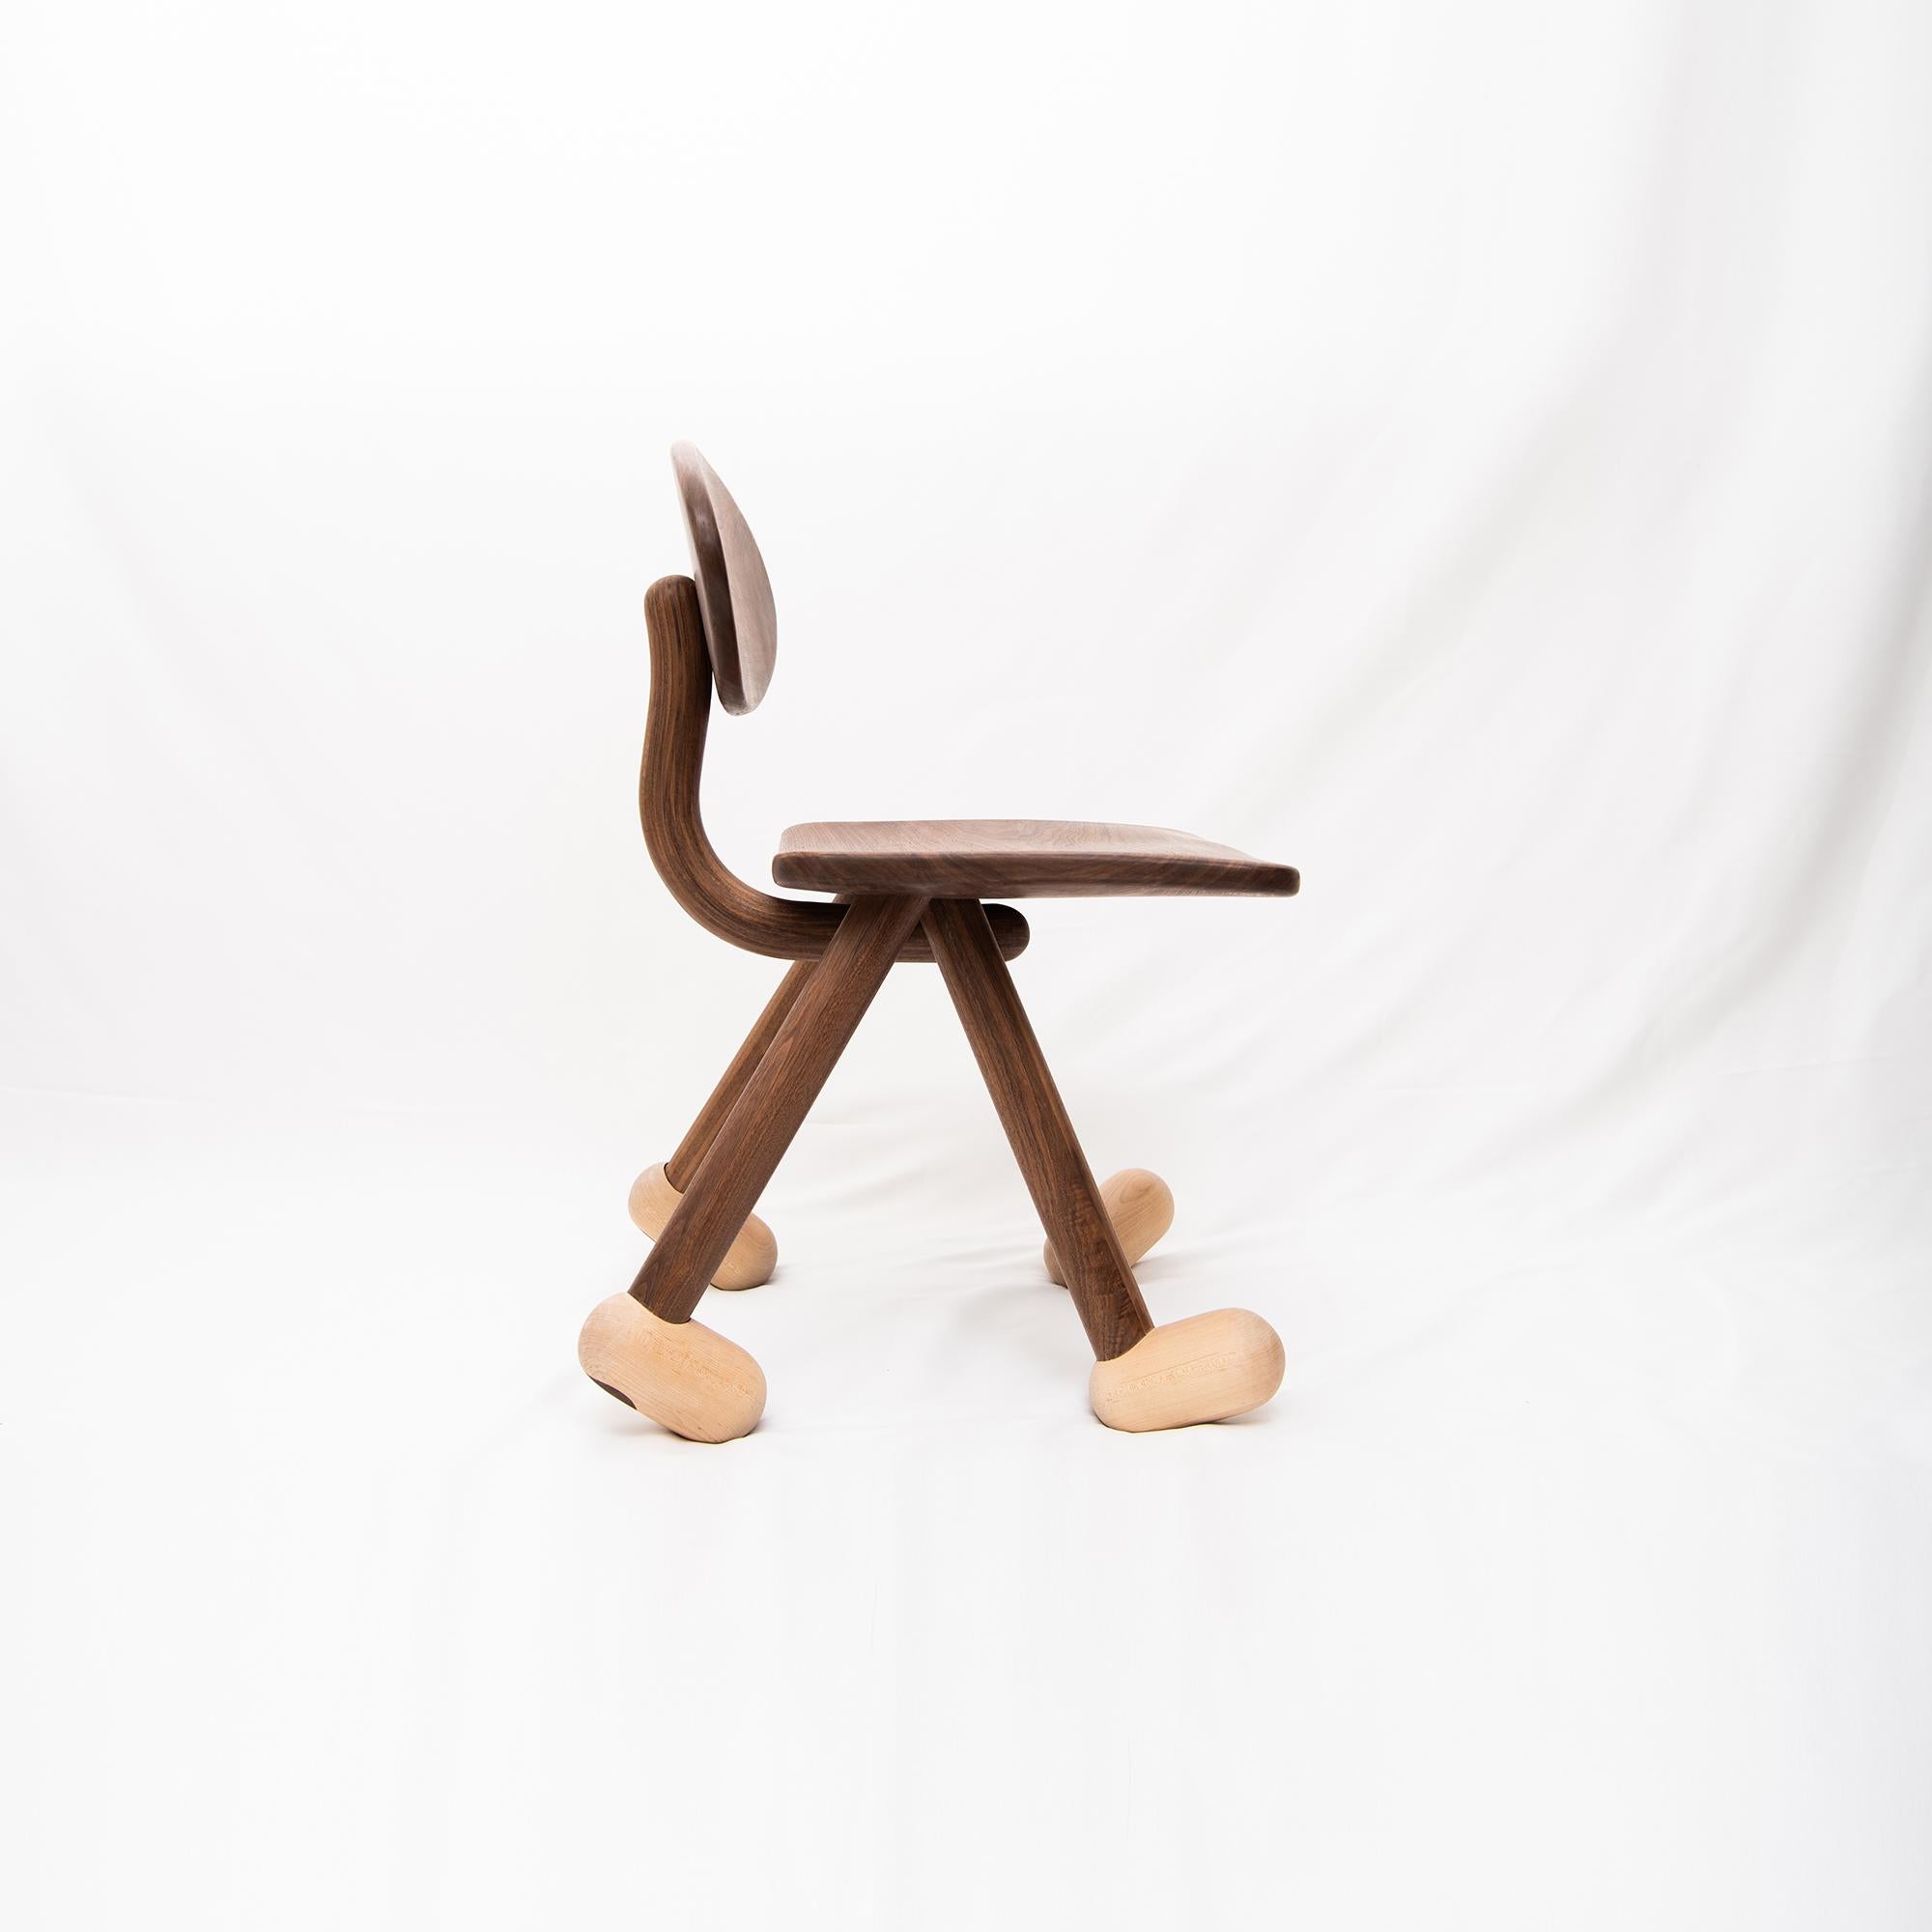 Other The Walky Chair by Design VA . Walnut & Maple For Sale